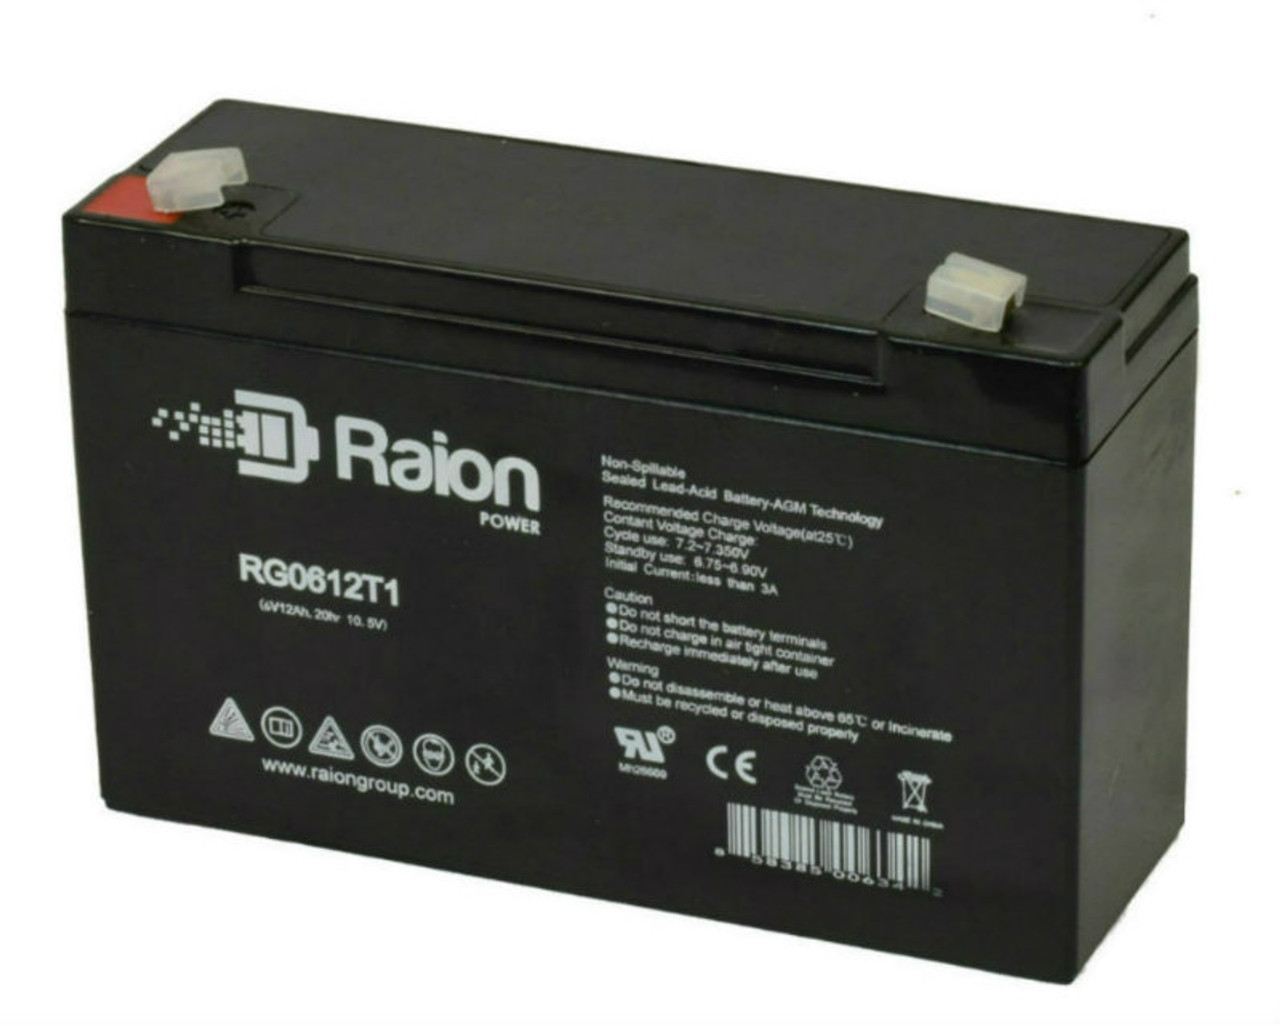 Raion Power RG06120T1 Replacement Battery for Leoch Battery DJW6-14